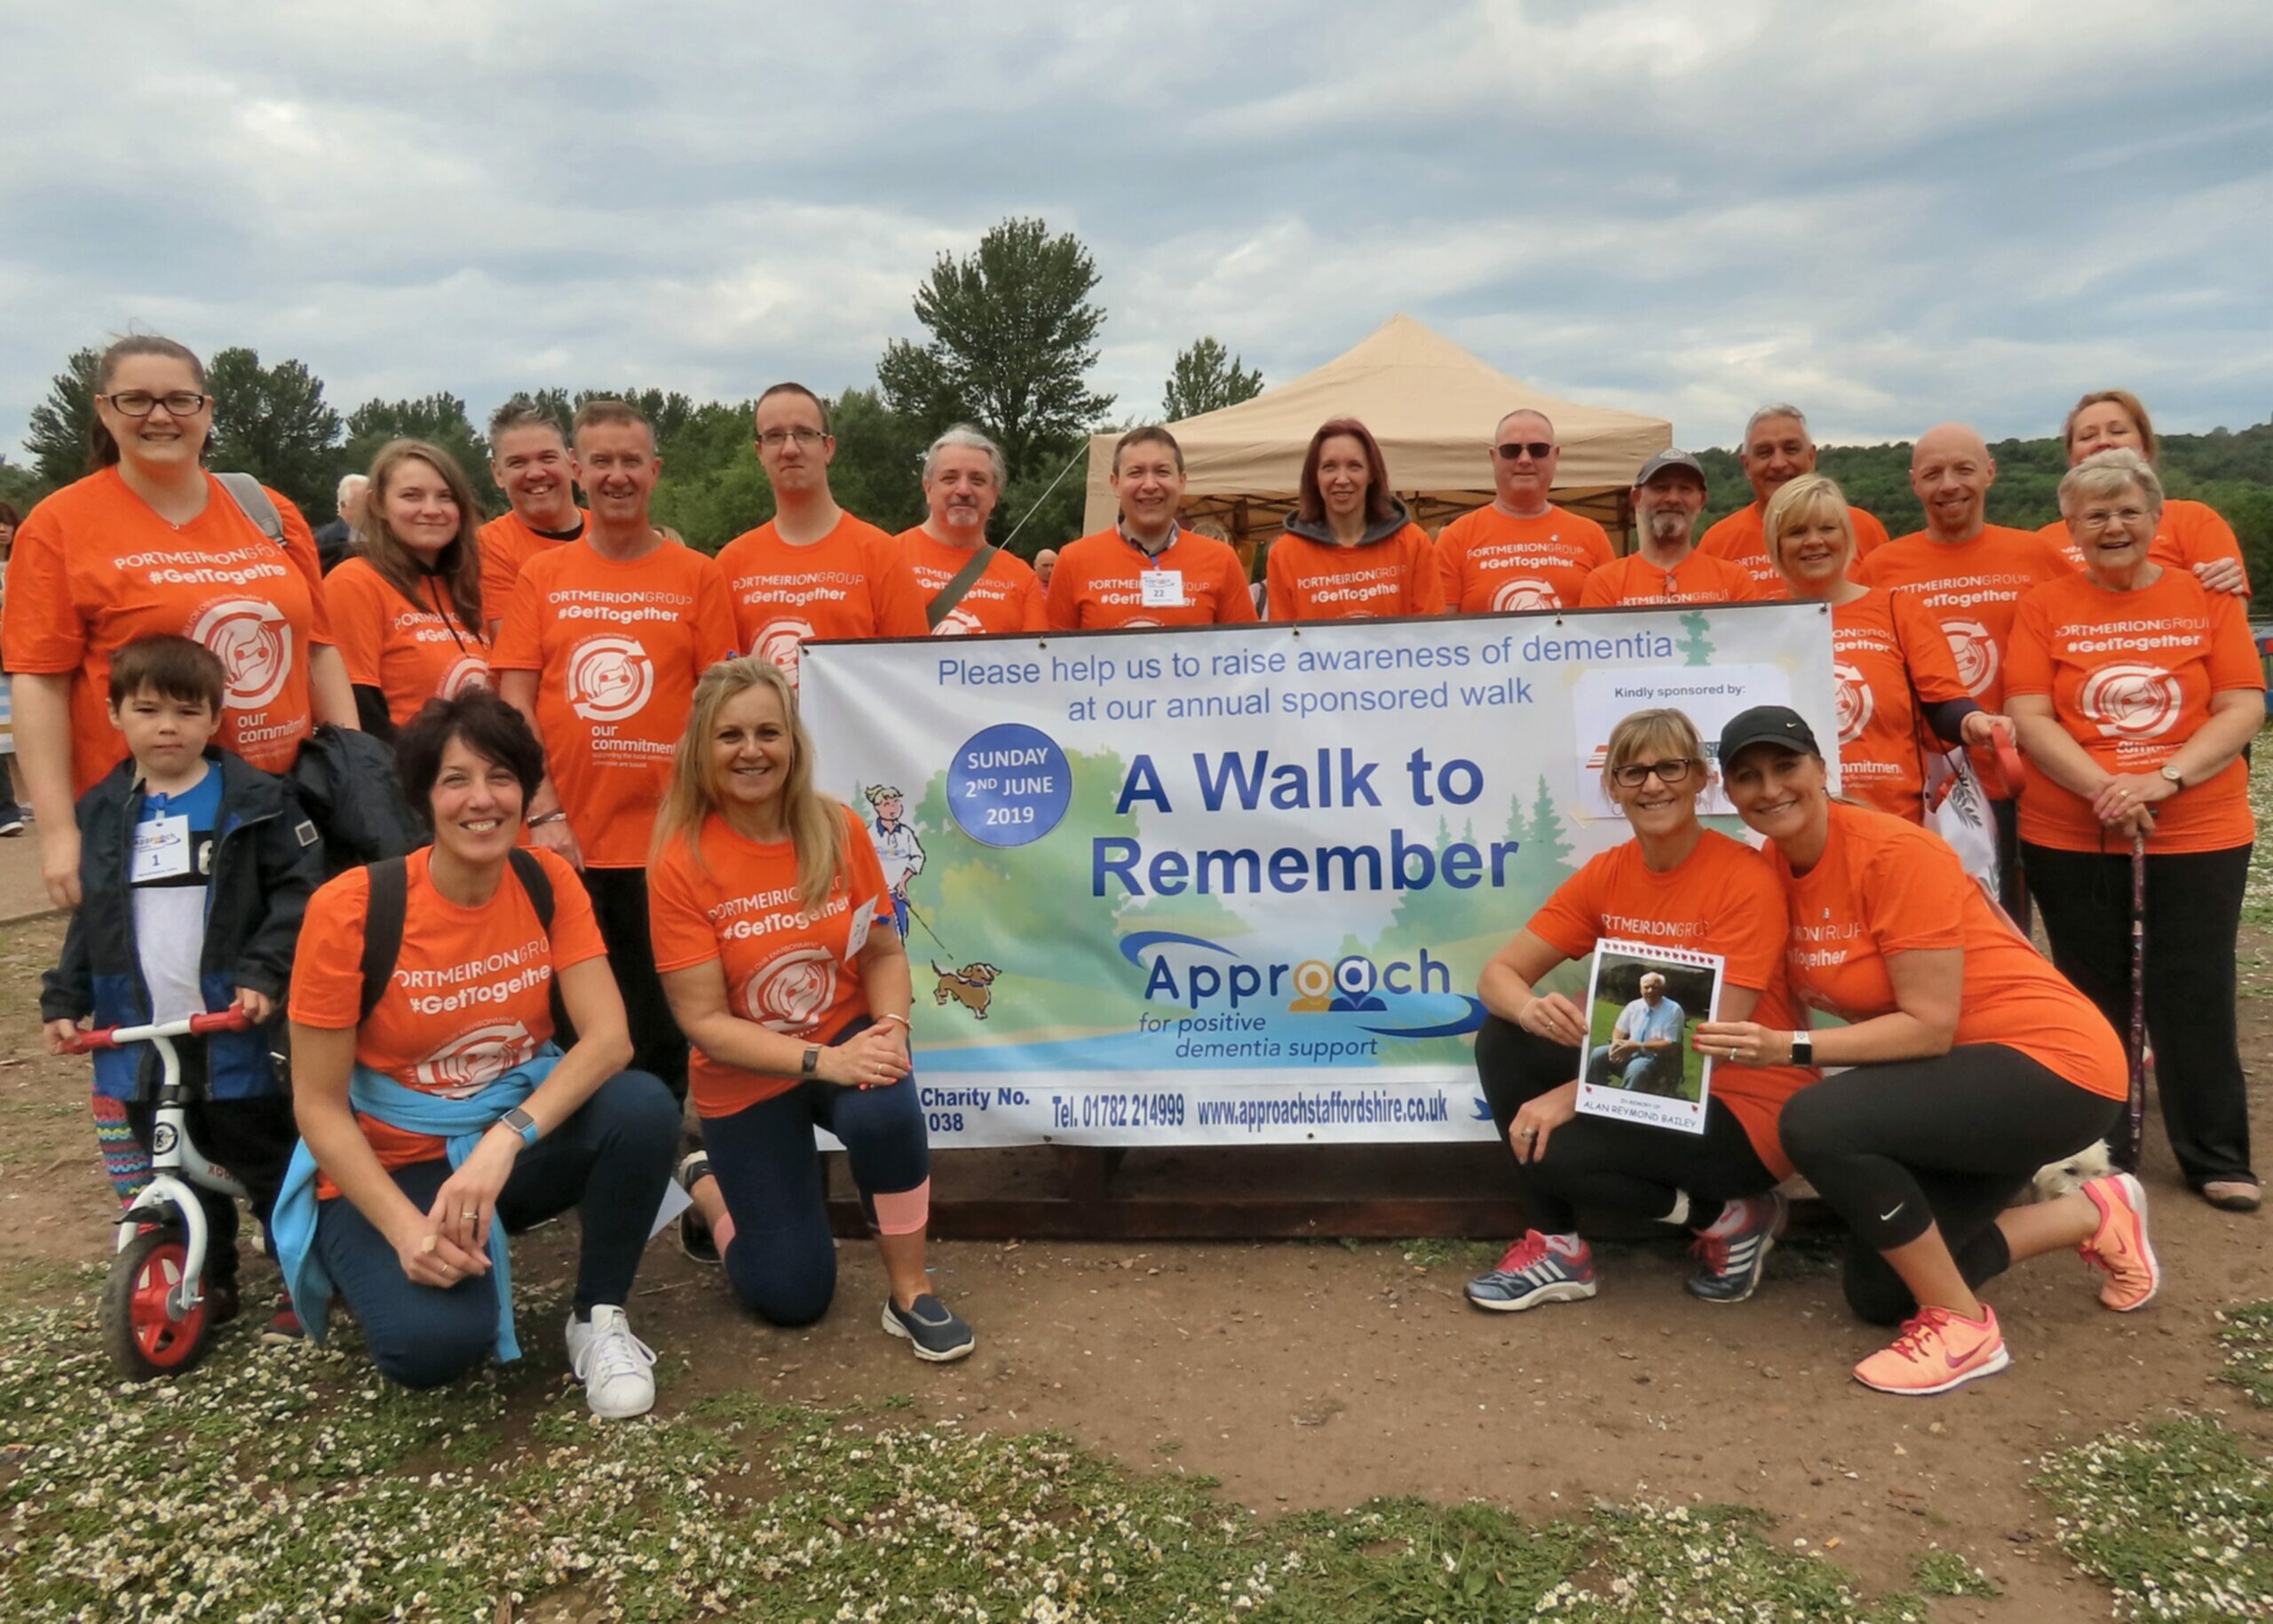 A Walk to Remember 2019…We Raised £2,464!